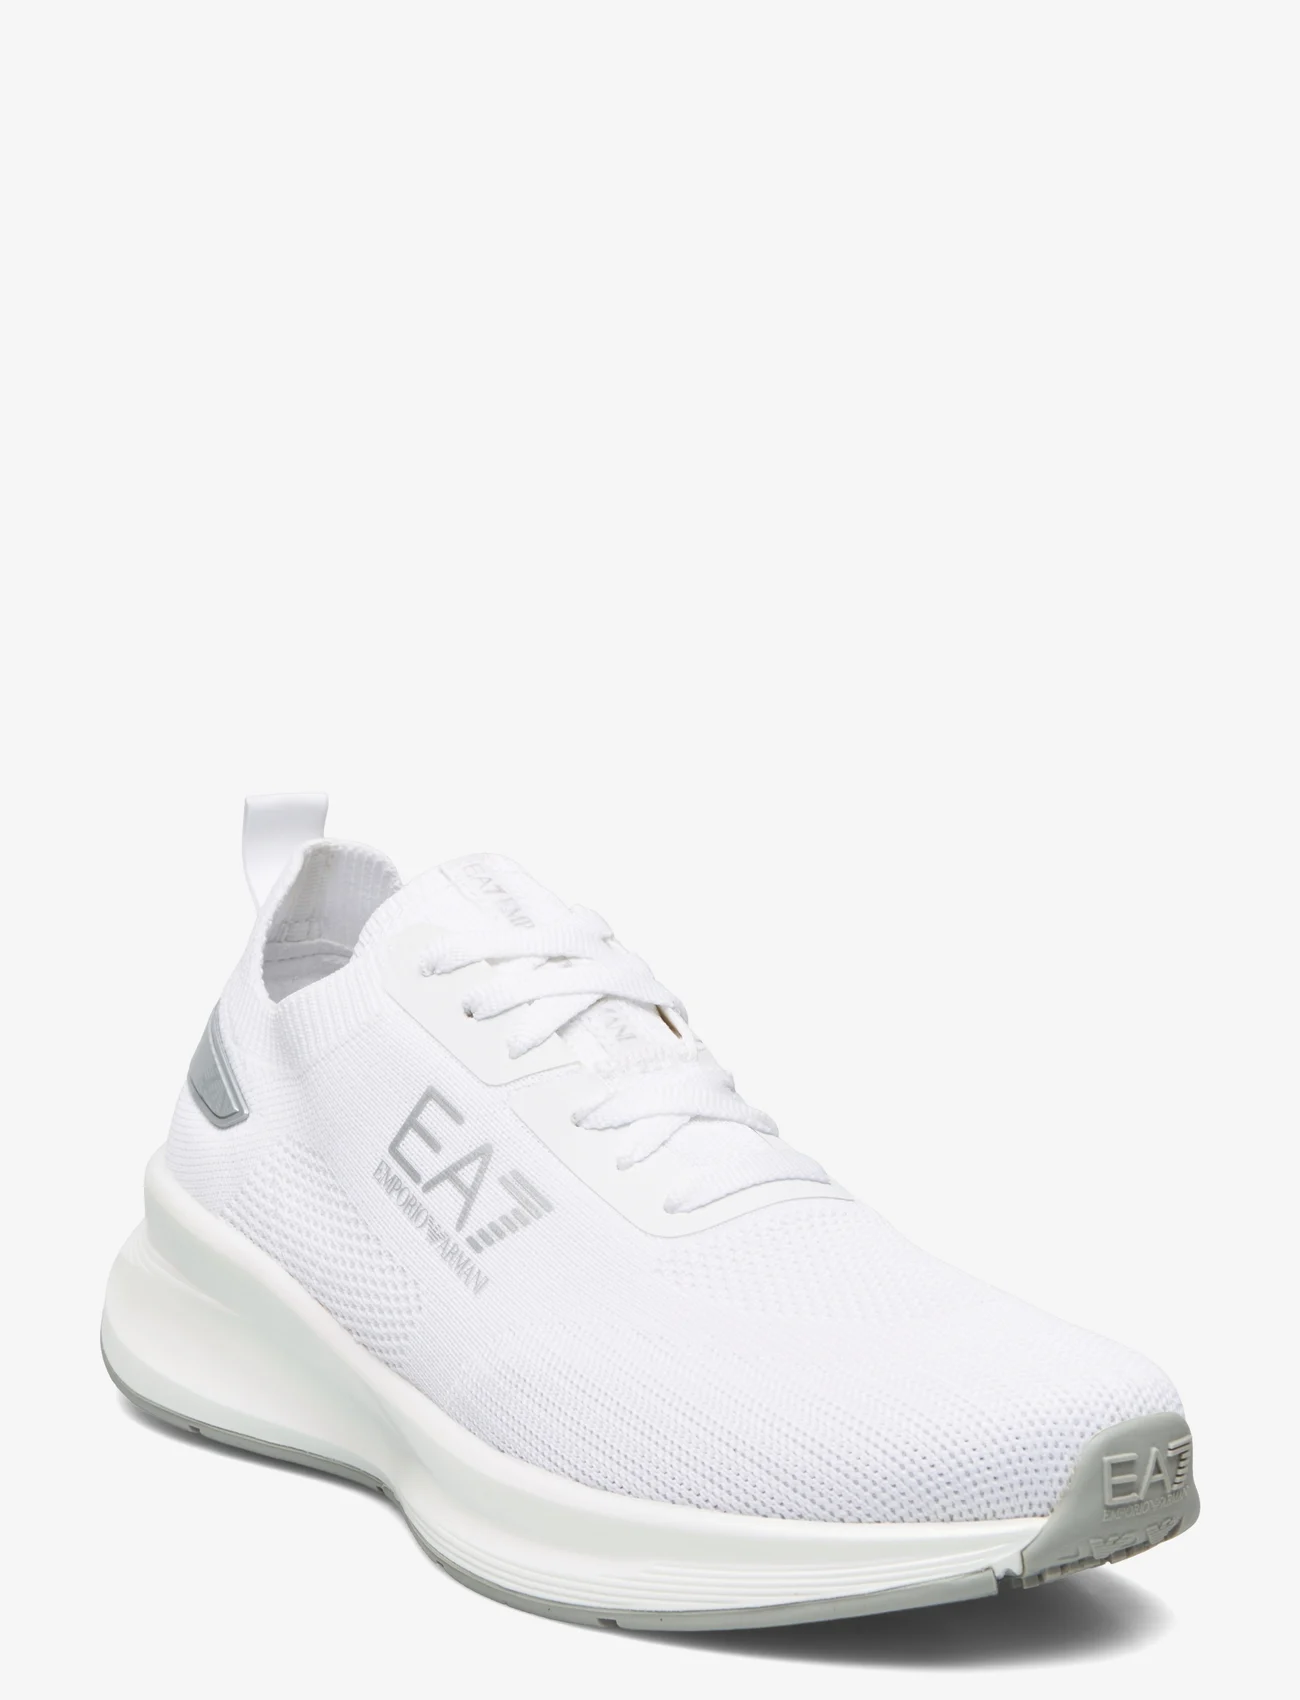 EA7 - SNEAKERS - low top sneakers - m696-white+silver - 0